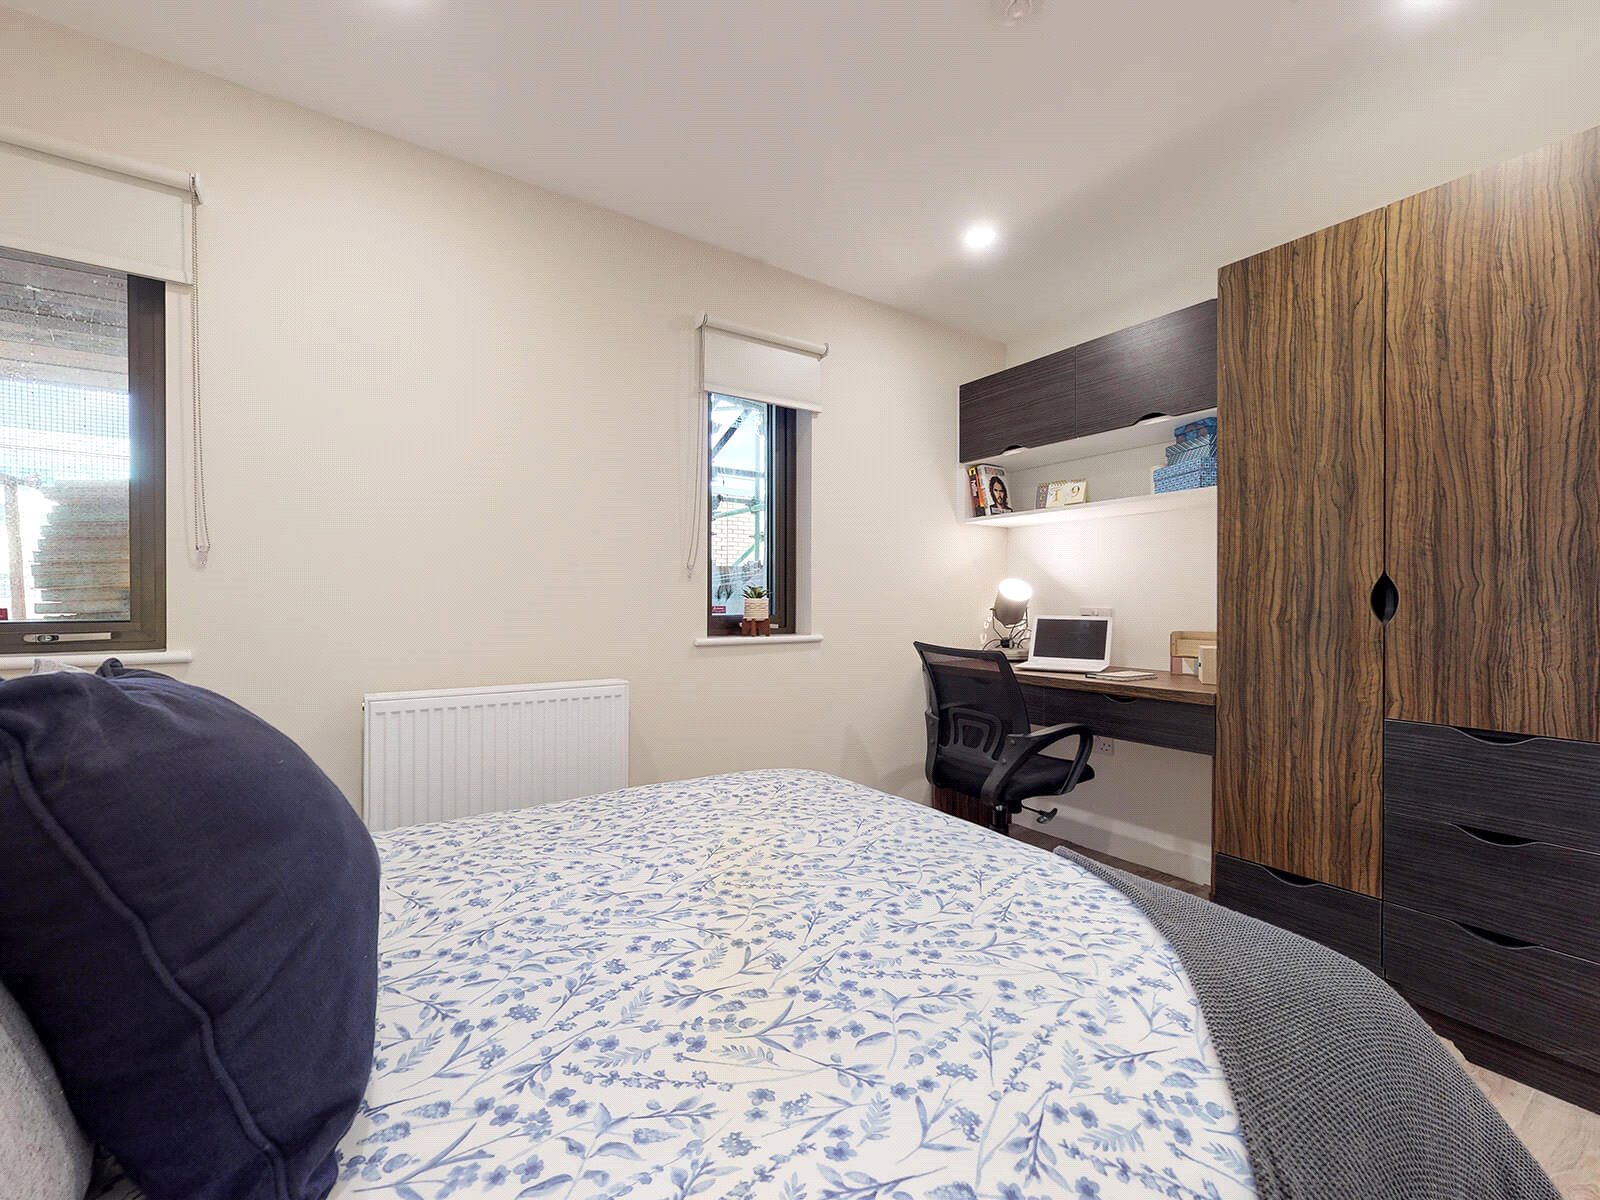 2 bed apartment for rent in Sheffield. From rentbunk.com